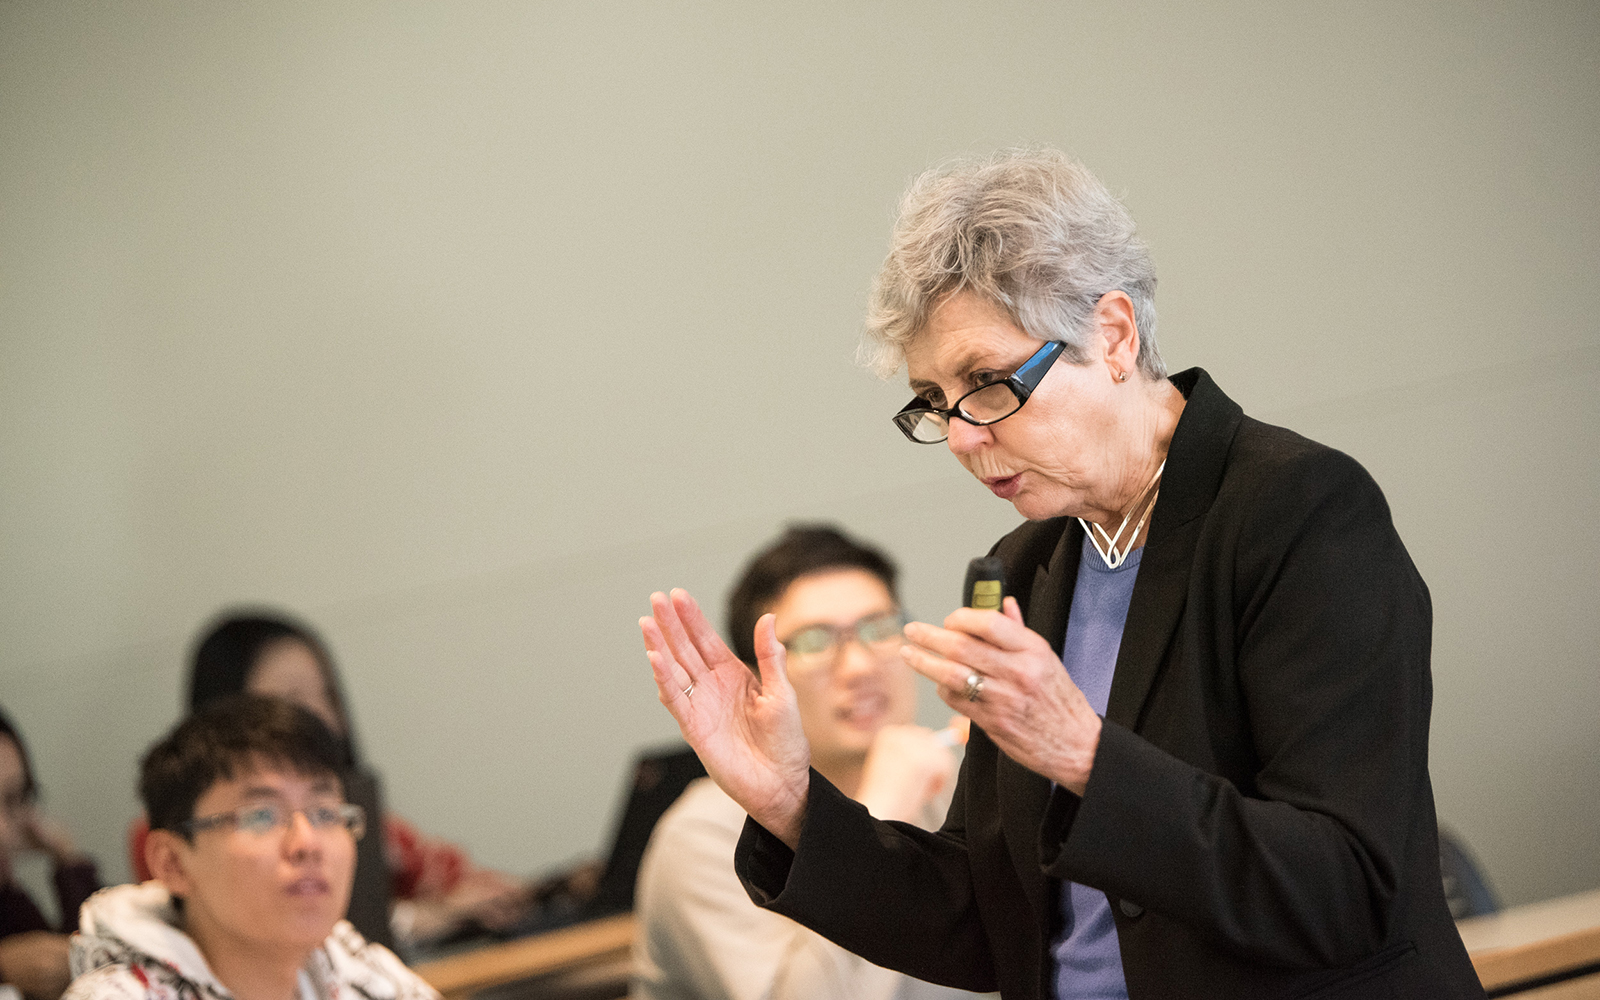 Susan Spiggle (above), professor emeritus in marketing, delivers a presentation entitled "Principles of Writing for Clarity" during the Fall '18 semester.  (Nathan Oldham / UConn School of Business)